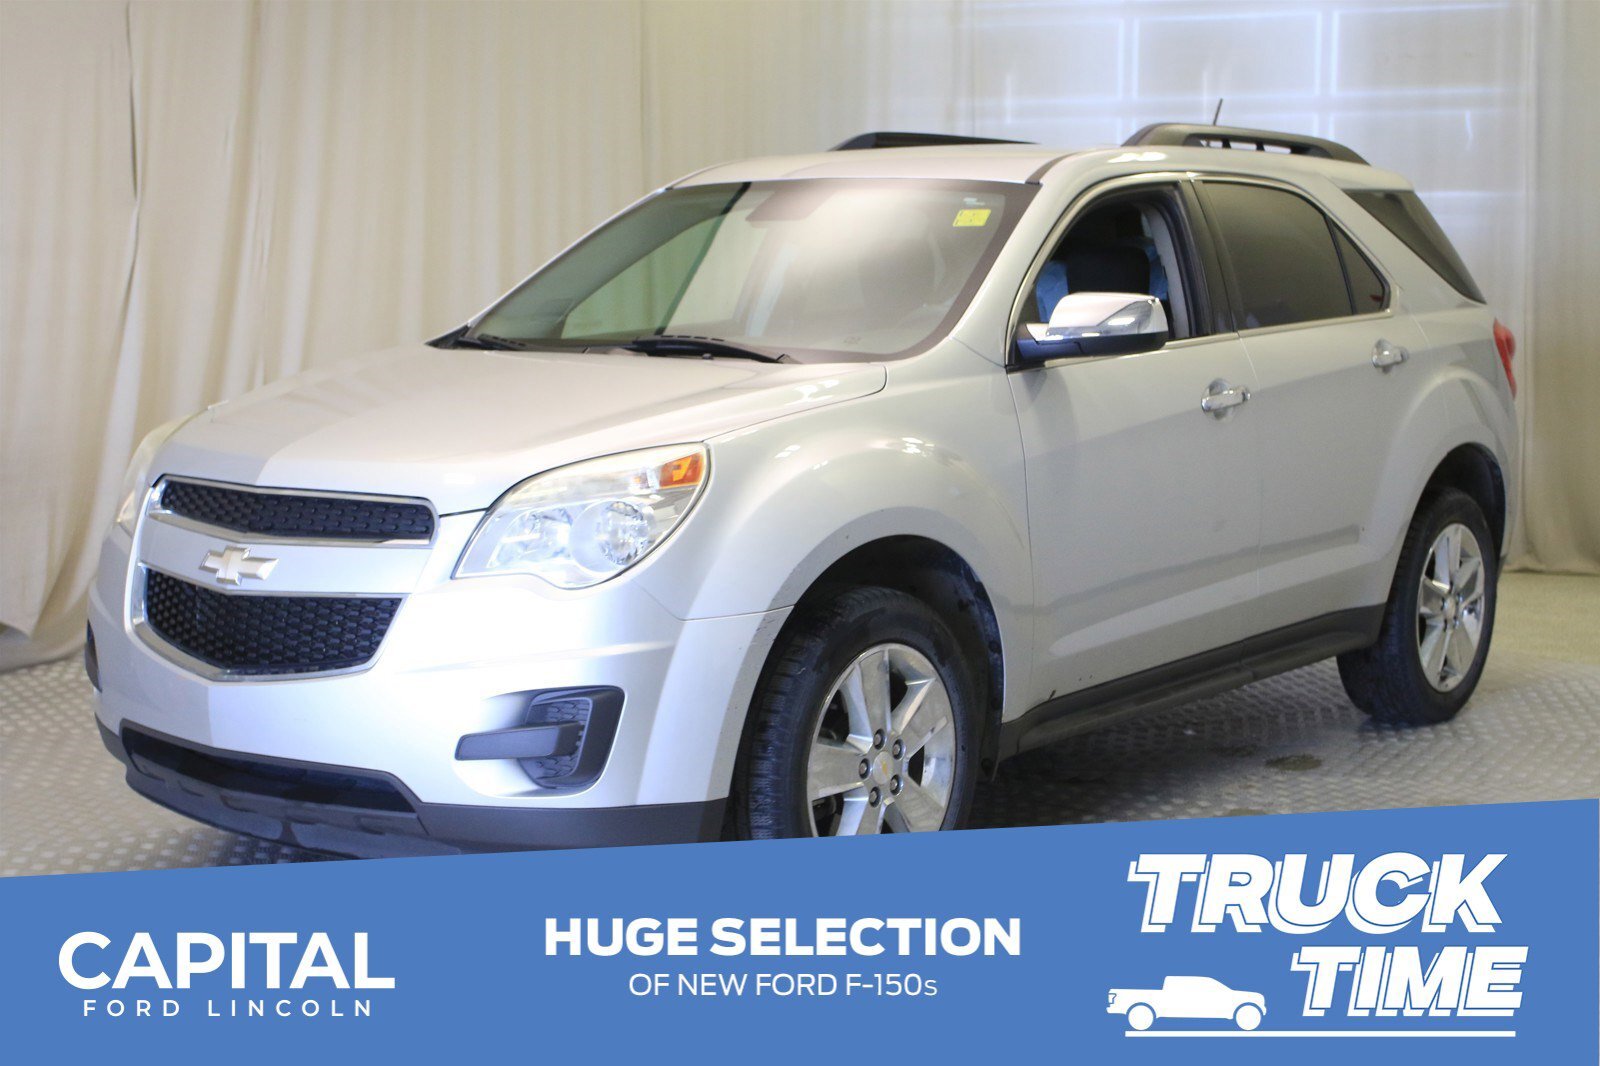 2014 Chevrolet Equinox LT AWD **Local Trade, Heated Seats, 4 Cyl, 2 Sets 